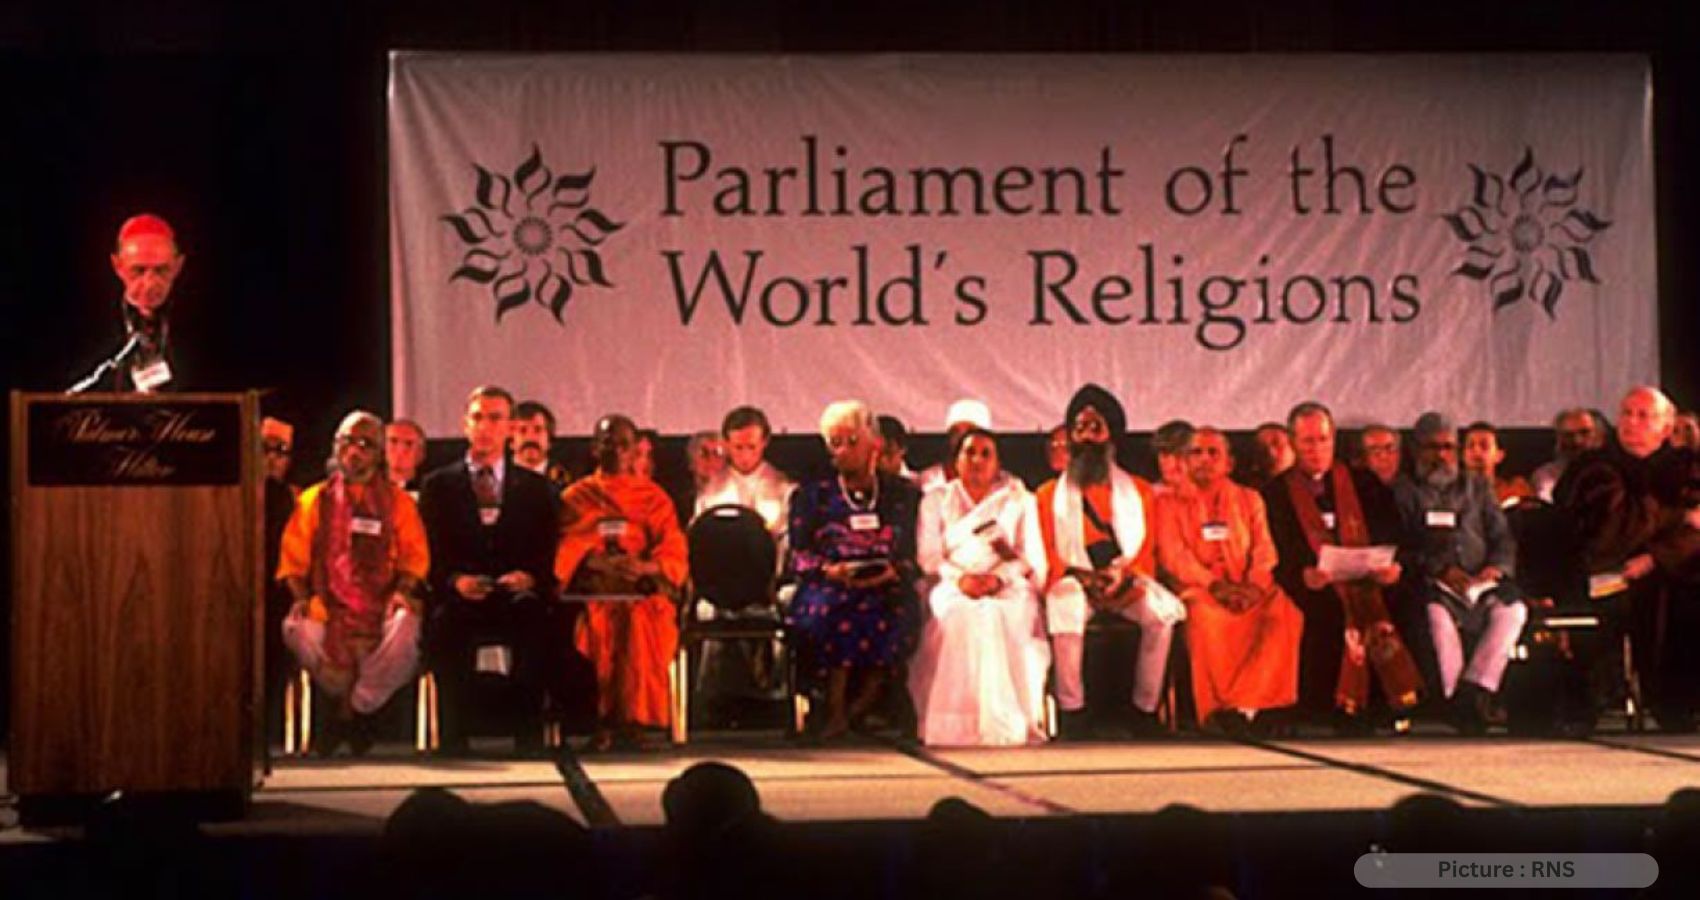 Parliament Of The World’s Religions Hopes To Harness Faith To Address World’s Ills